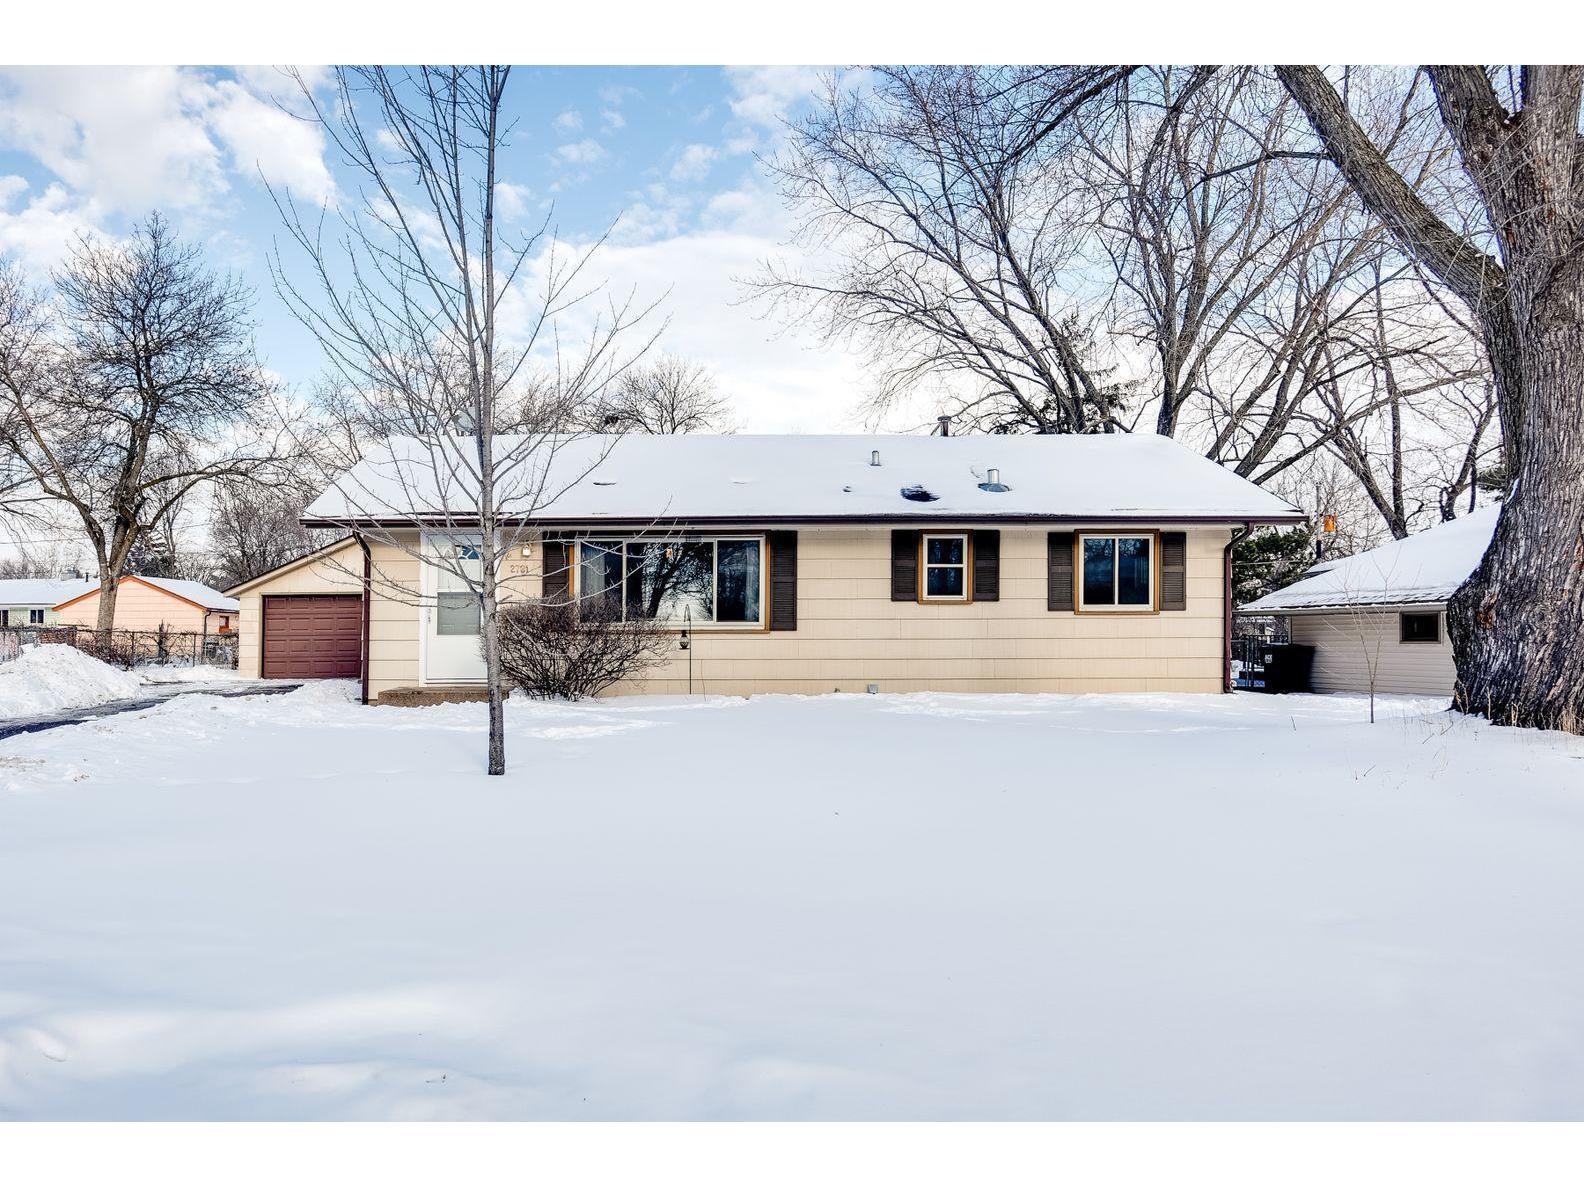 2721 121st Avenue NW Coon Rapids MN 55433 6143540 image1